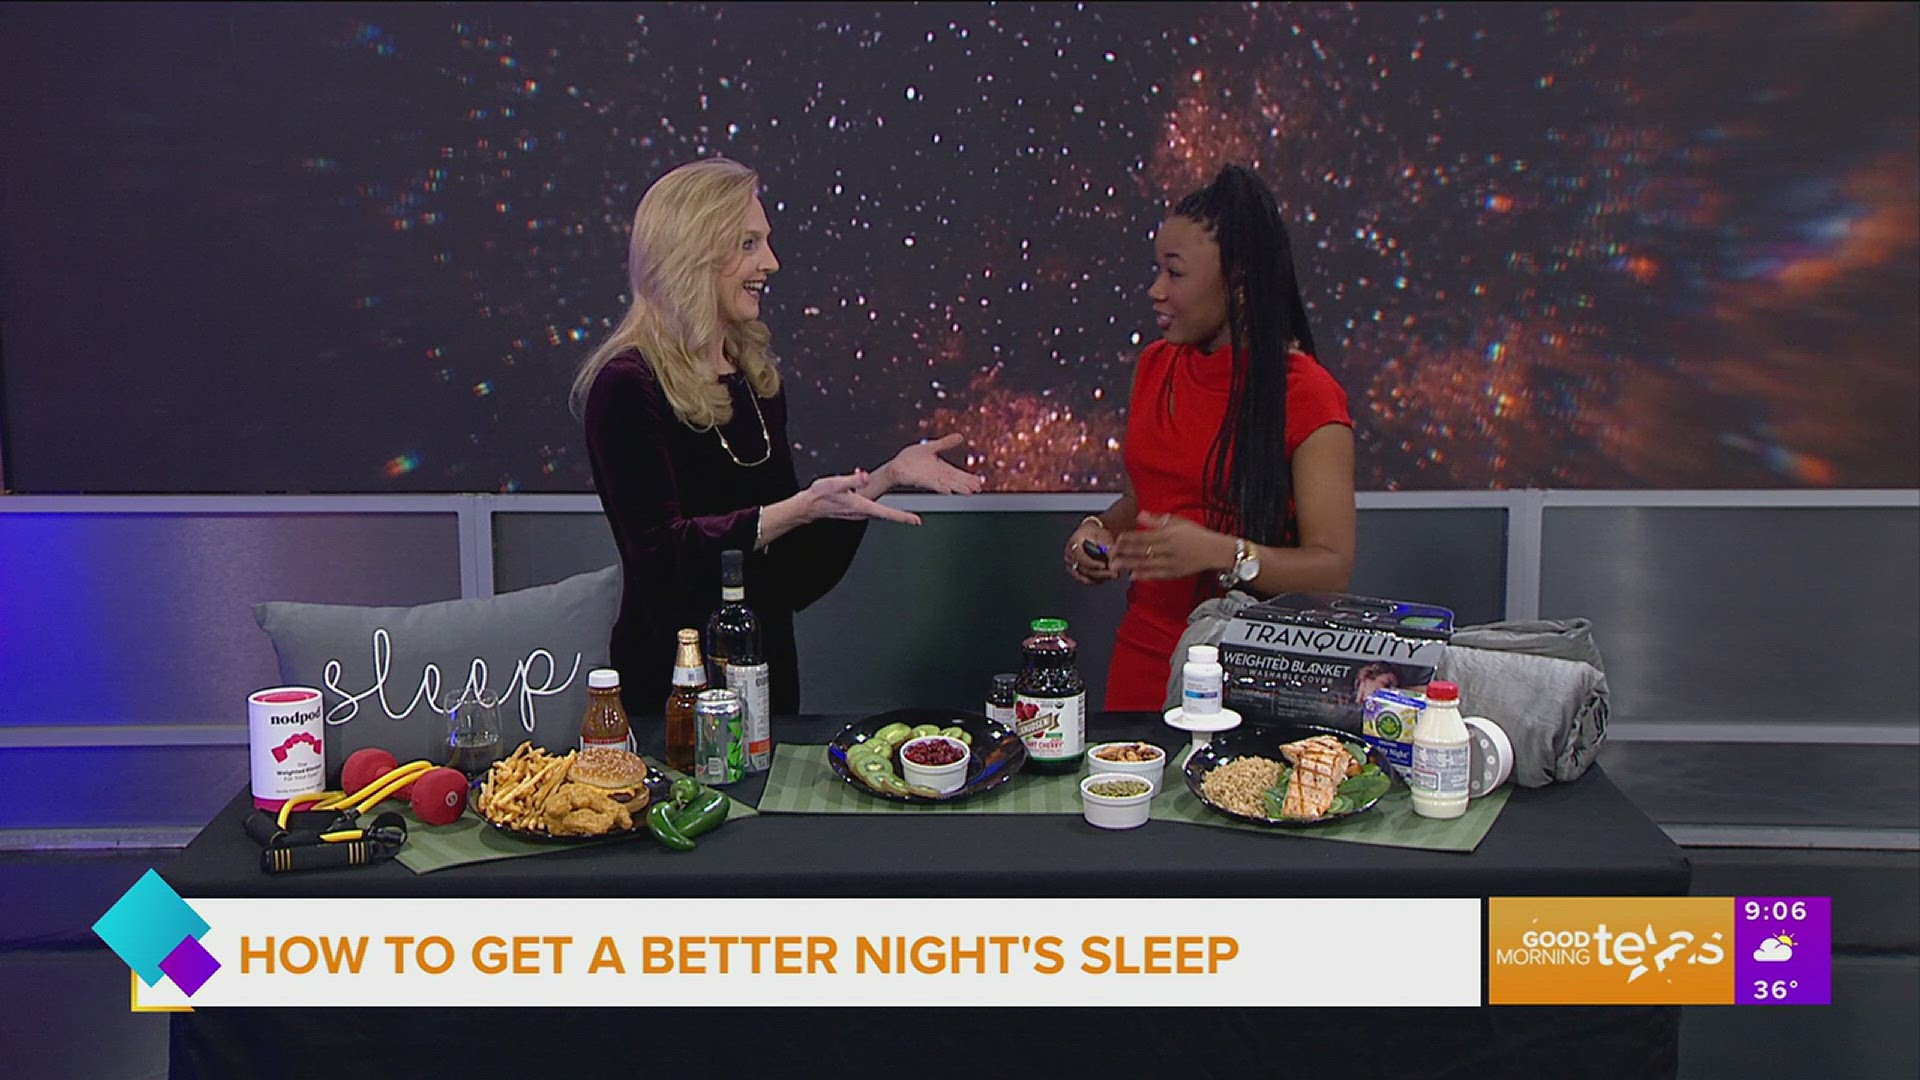 Dietician Meridan Zerner of Cooper Clinic shares what to eat and do to help you get a better night’s sleep